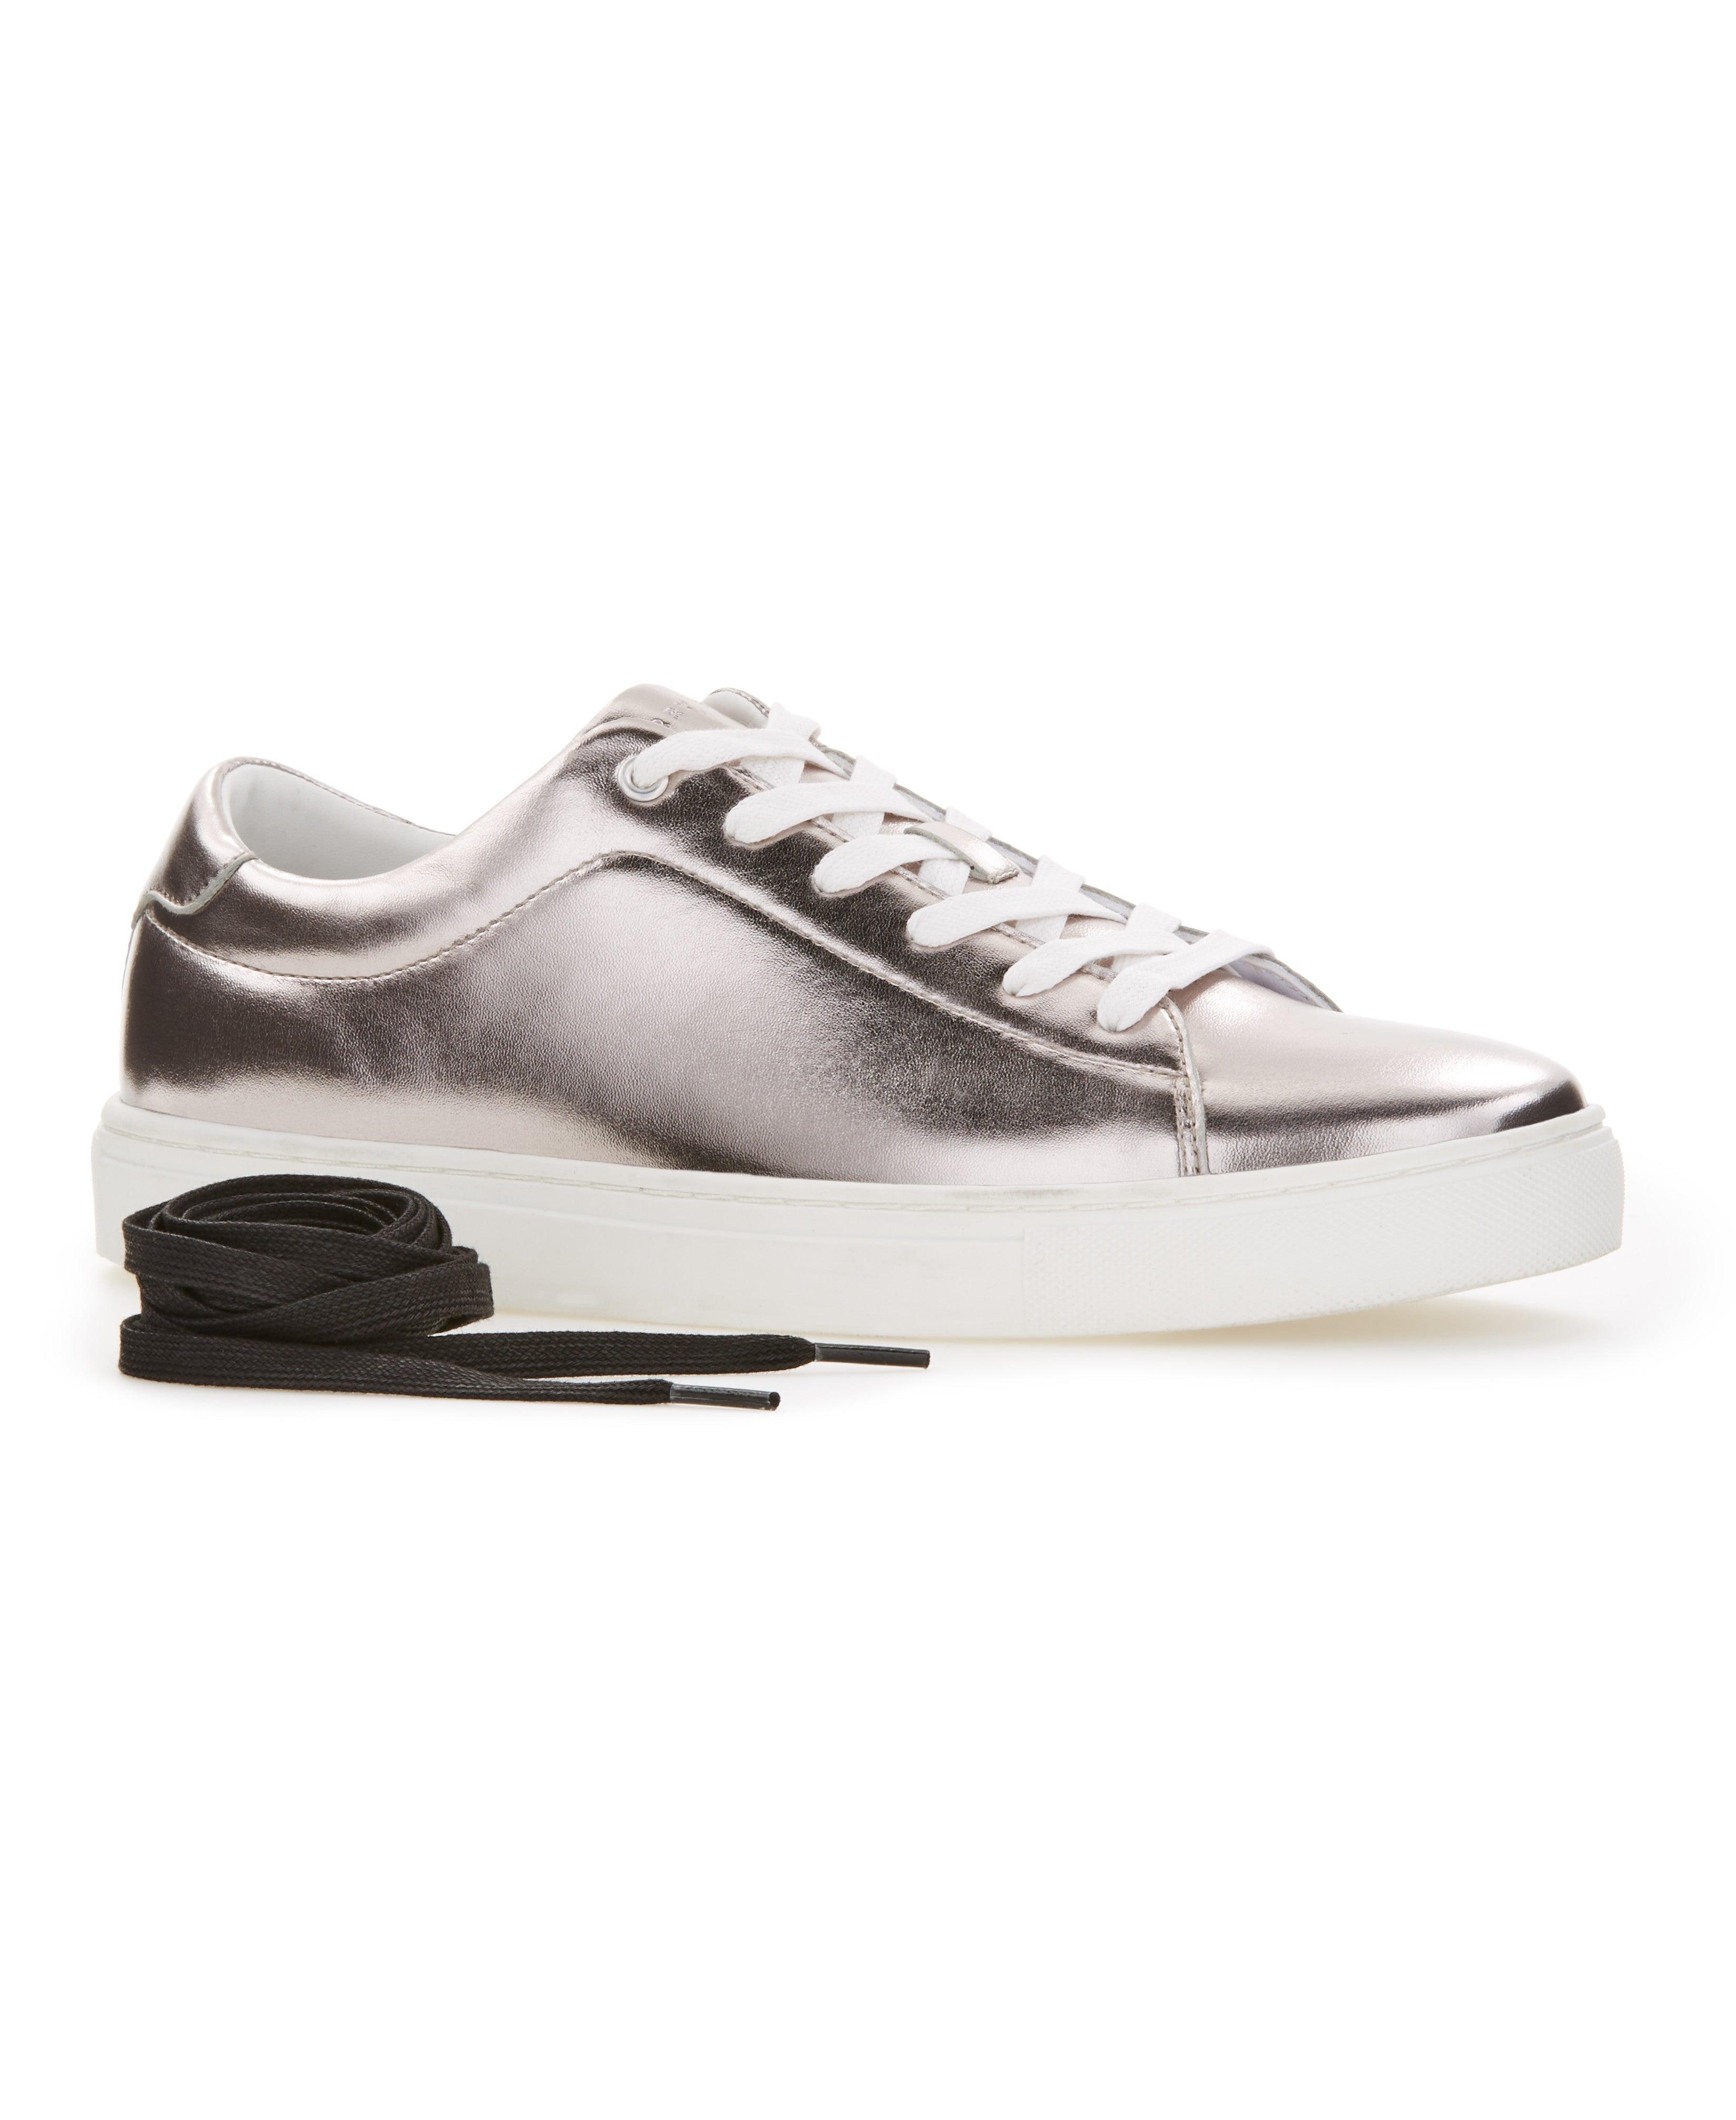 Perry Ellis Limited Edition Vincent 2.0 Sneaker in Metallic for Men | Lyst